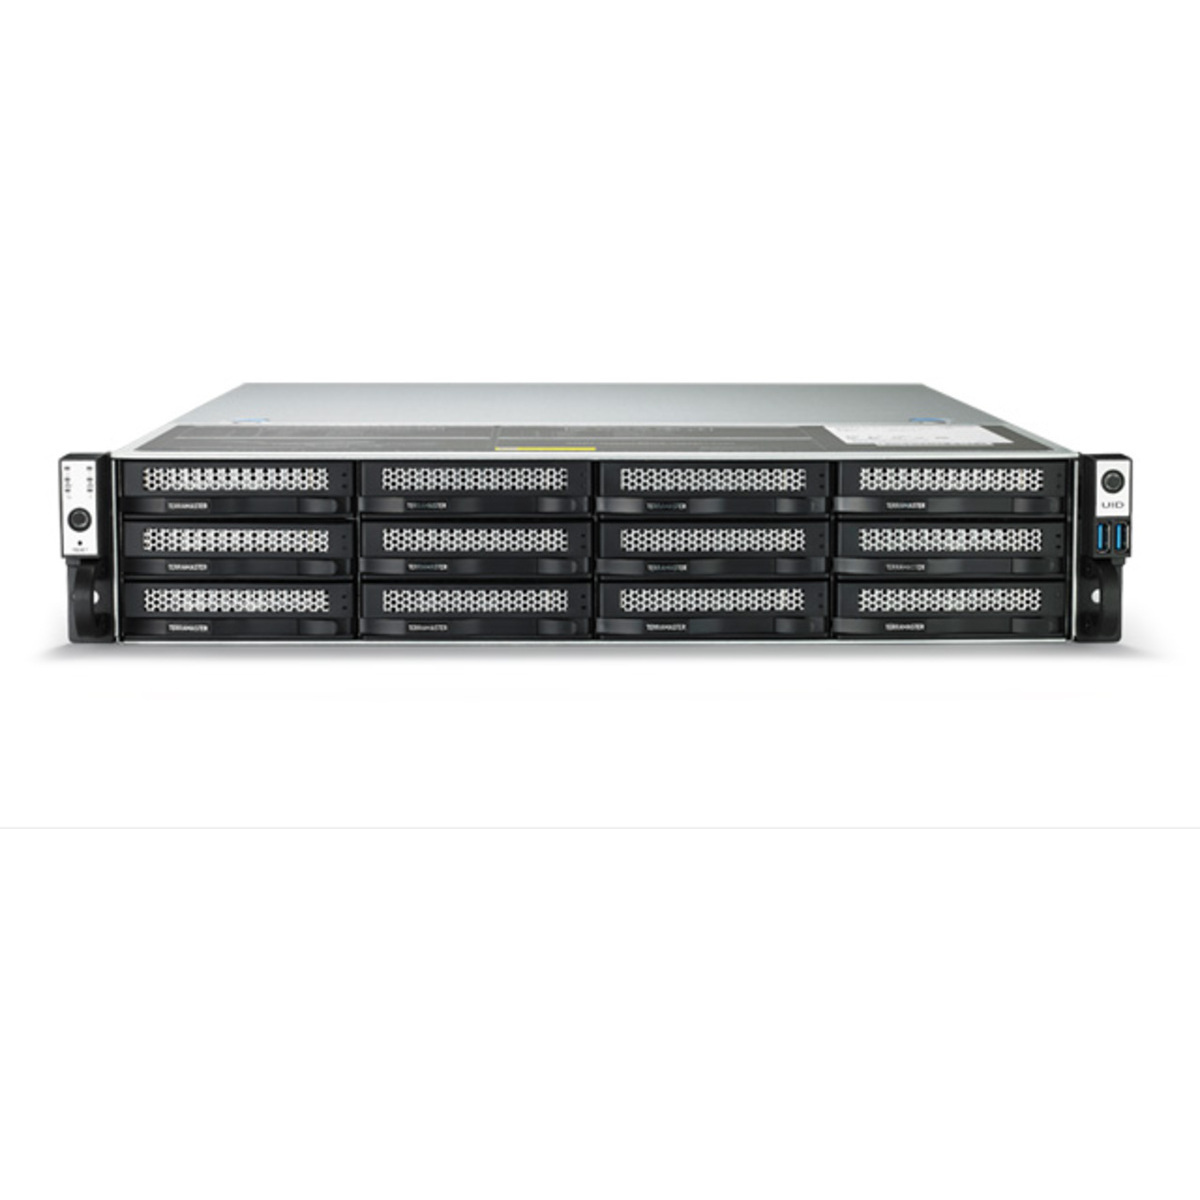 TerraMaster U12-722-2224 14tb 12-Bay RackMount Large Business / Enterprise NAS - Network Attached Storage Device 7x2tb Seagate IronWolf Pro ST2000NT001 3.5 7200rpm SATA 6Gb/s HDD NAS Class Drives Installed - Burn-In Tested U12-722-2224